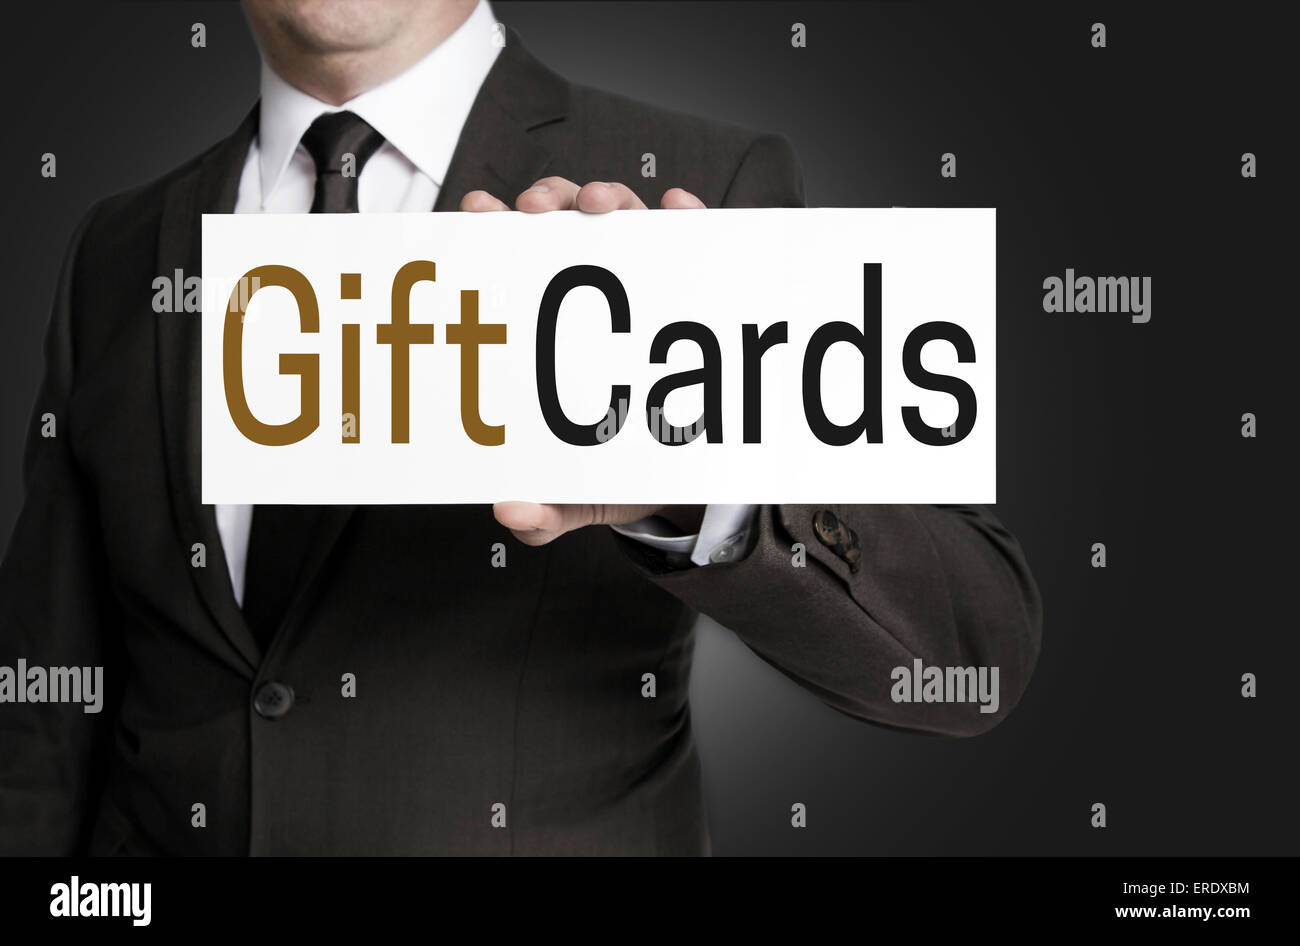 Gift Cards sign is held by businessman. Stock Photo